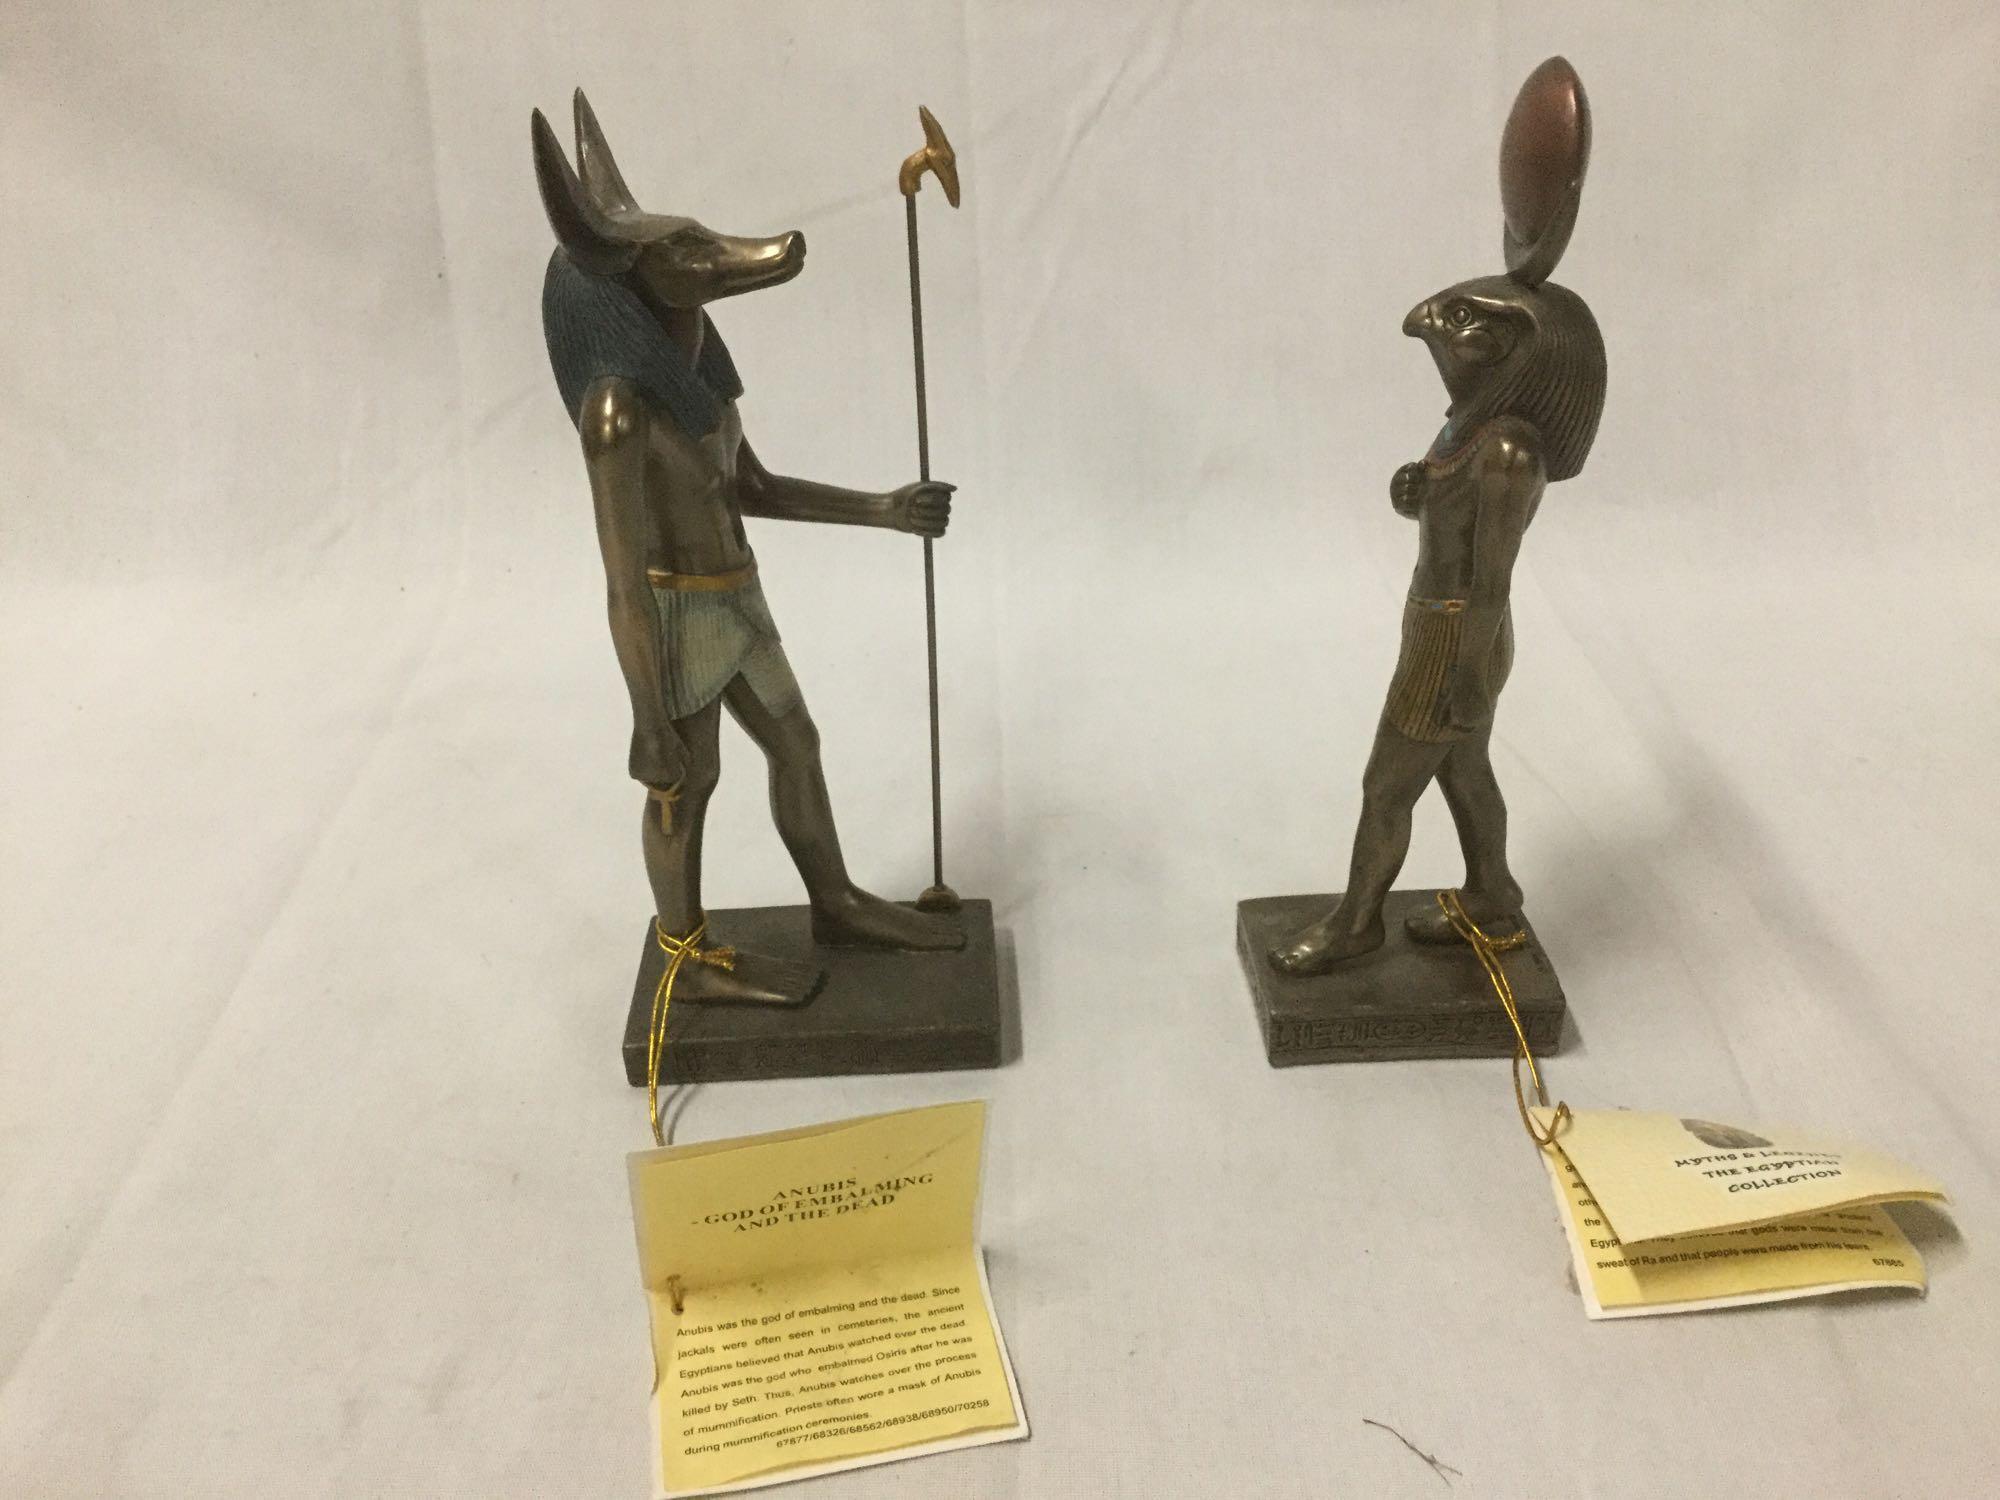 2 piece lot of Myths and Legends - Egyptian Collection Metal statuettes by Veronese, 2002